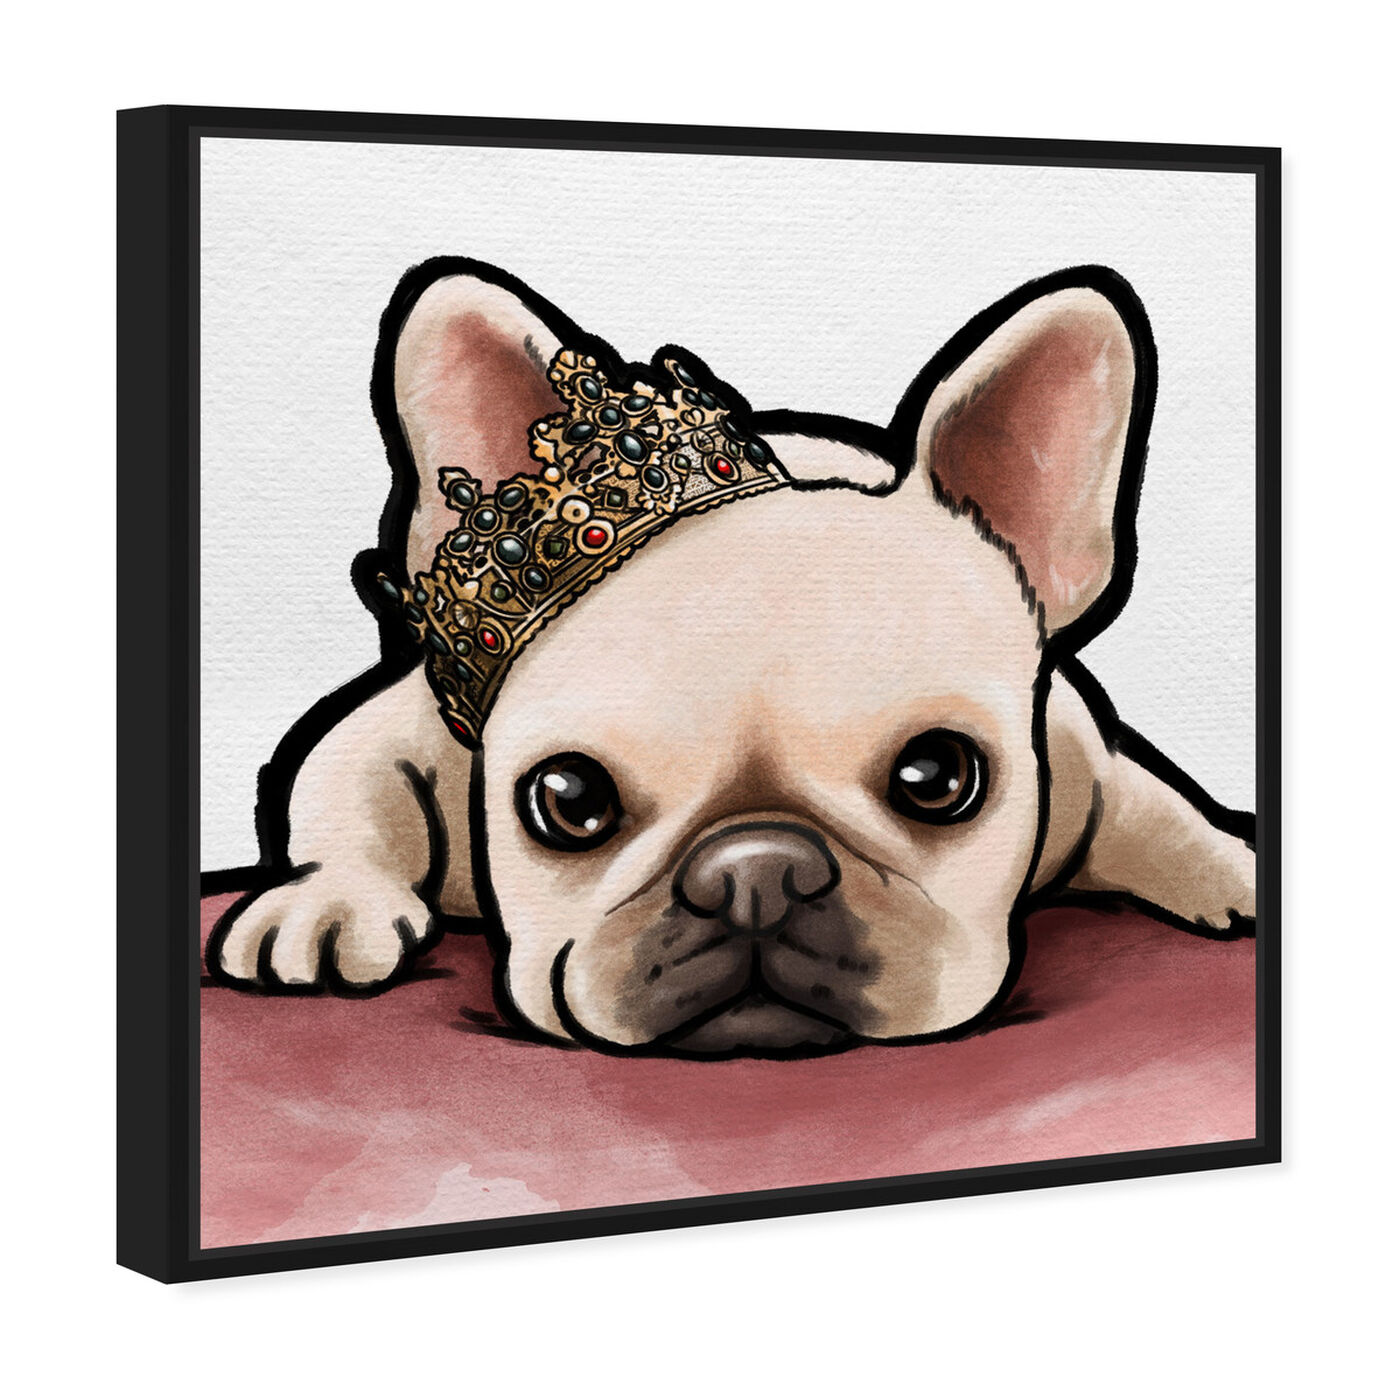 Angled view of Royal Frenchie featuring animals and dogs and puppies art.